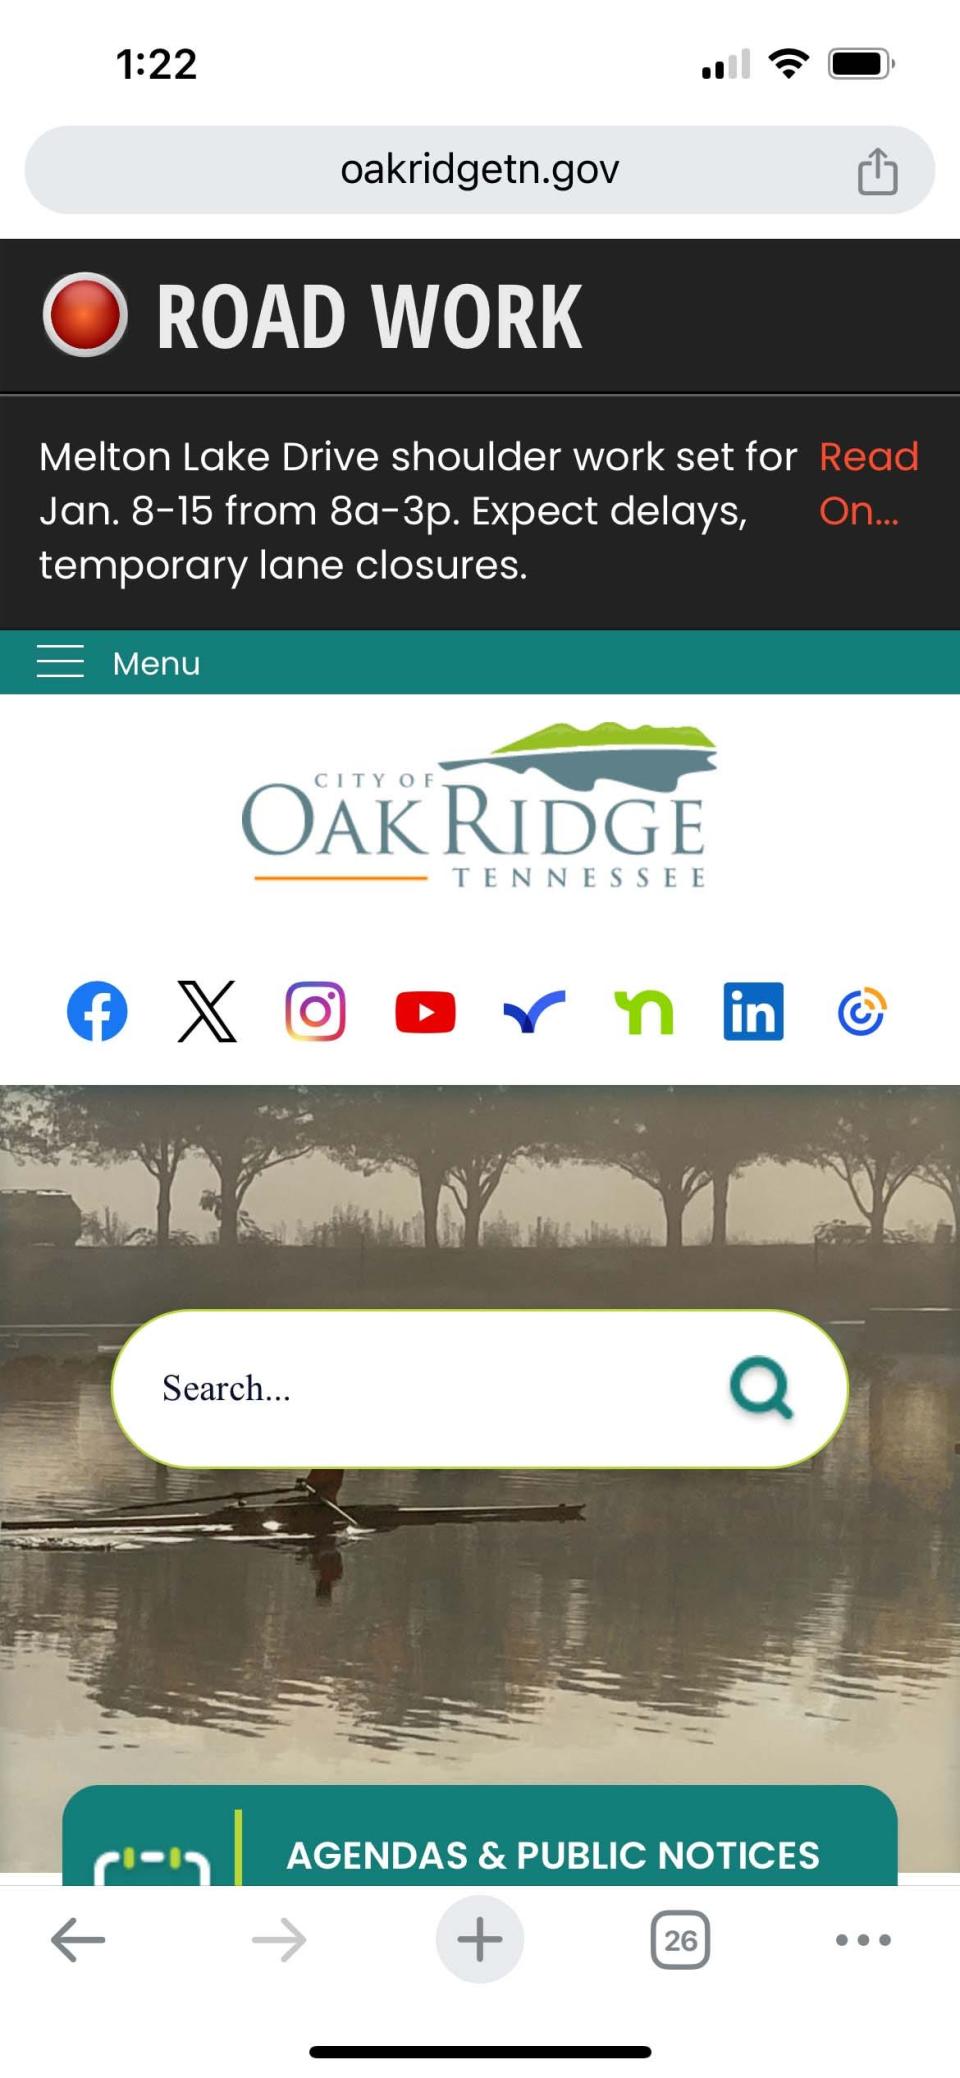 A smartphone screenshot of the city of Oak Ridge's new website. It includes a "breaking news"-type feature such as the link to information on road work at the top of the website.